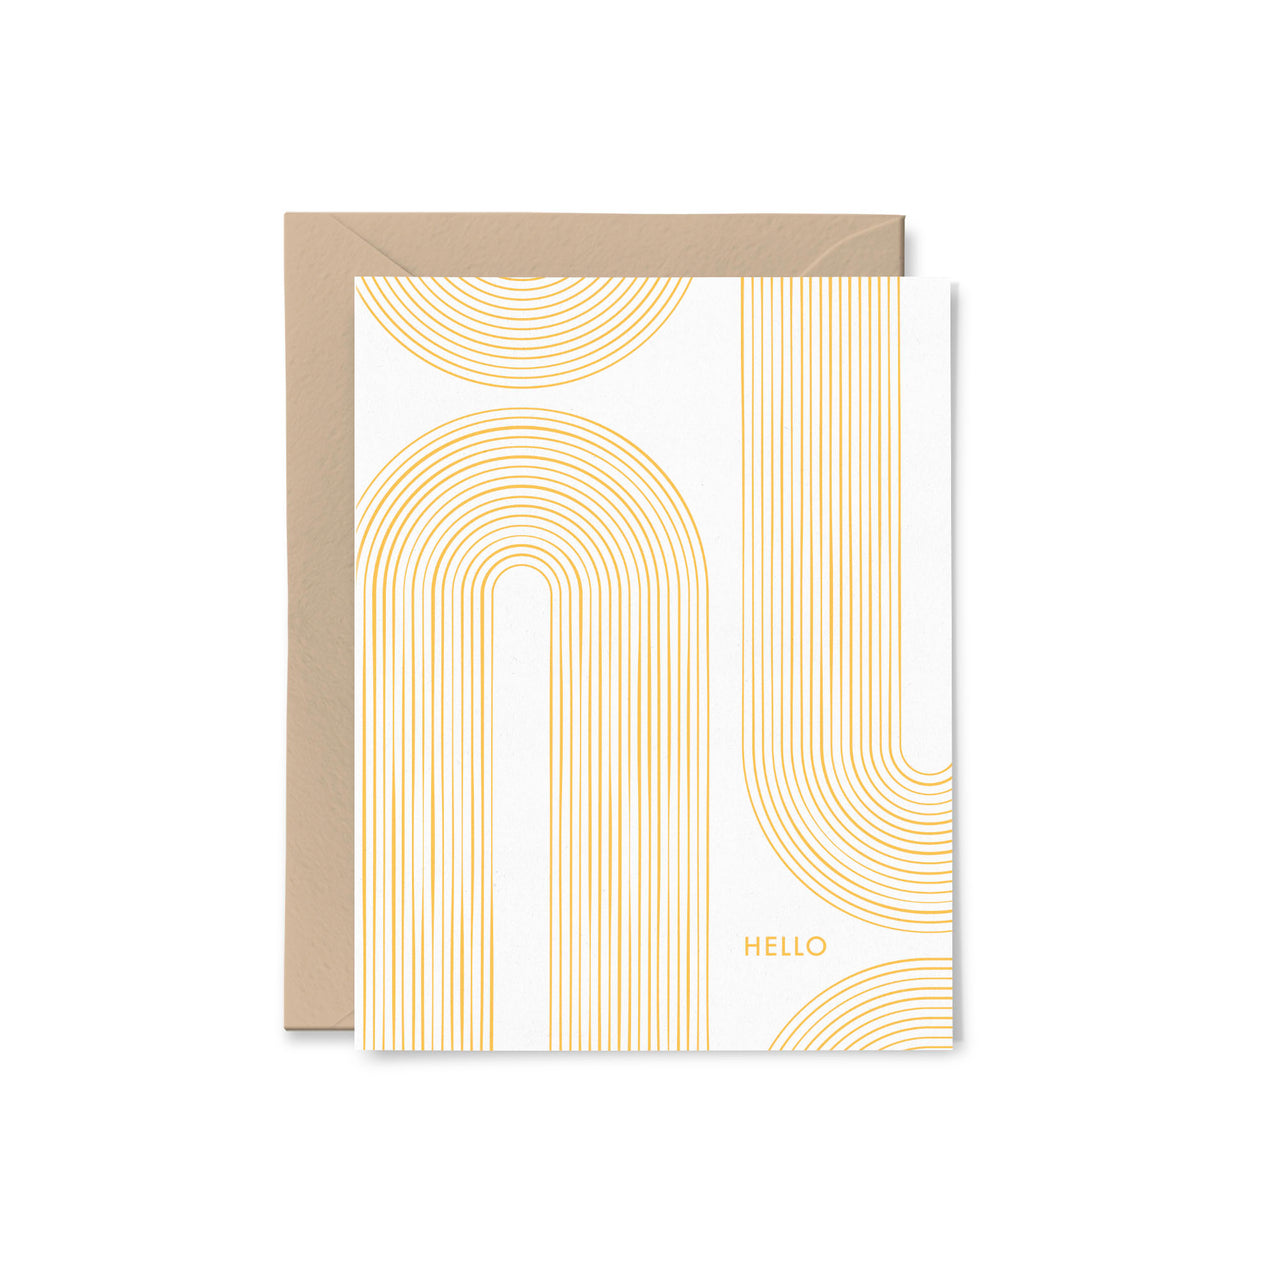 Hello Arches Everyday Encouragement Card | Overflow & Co.